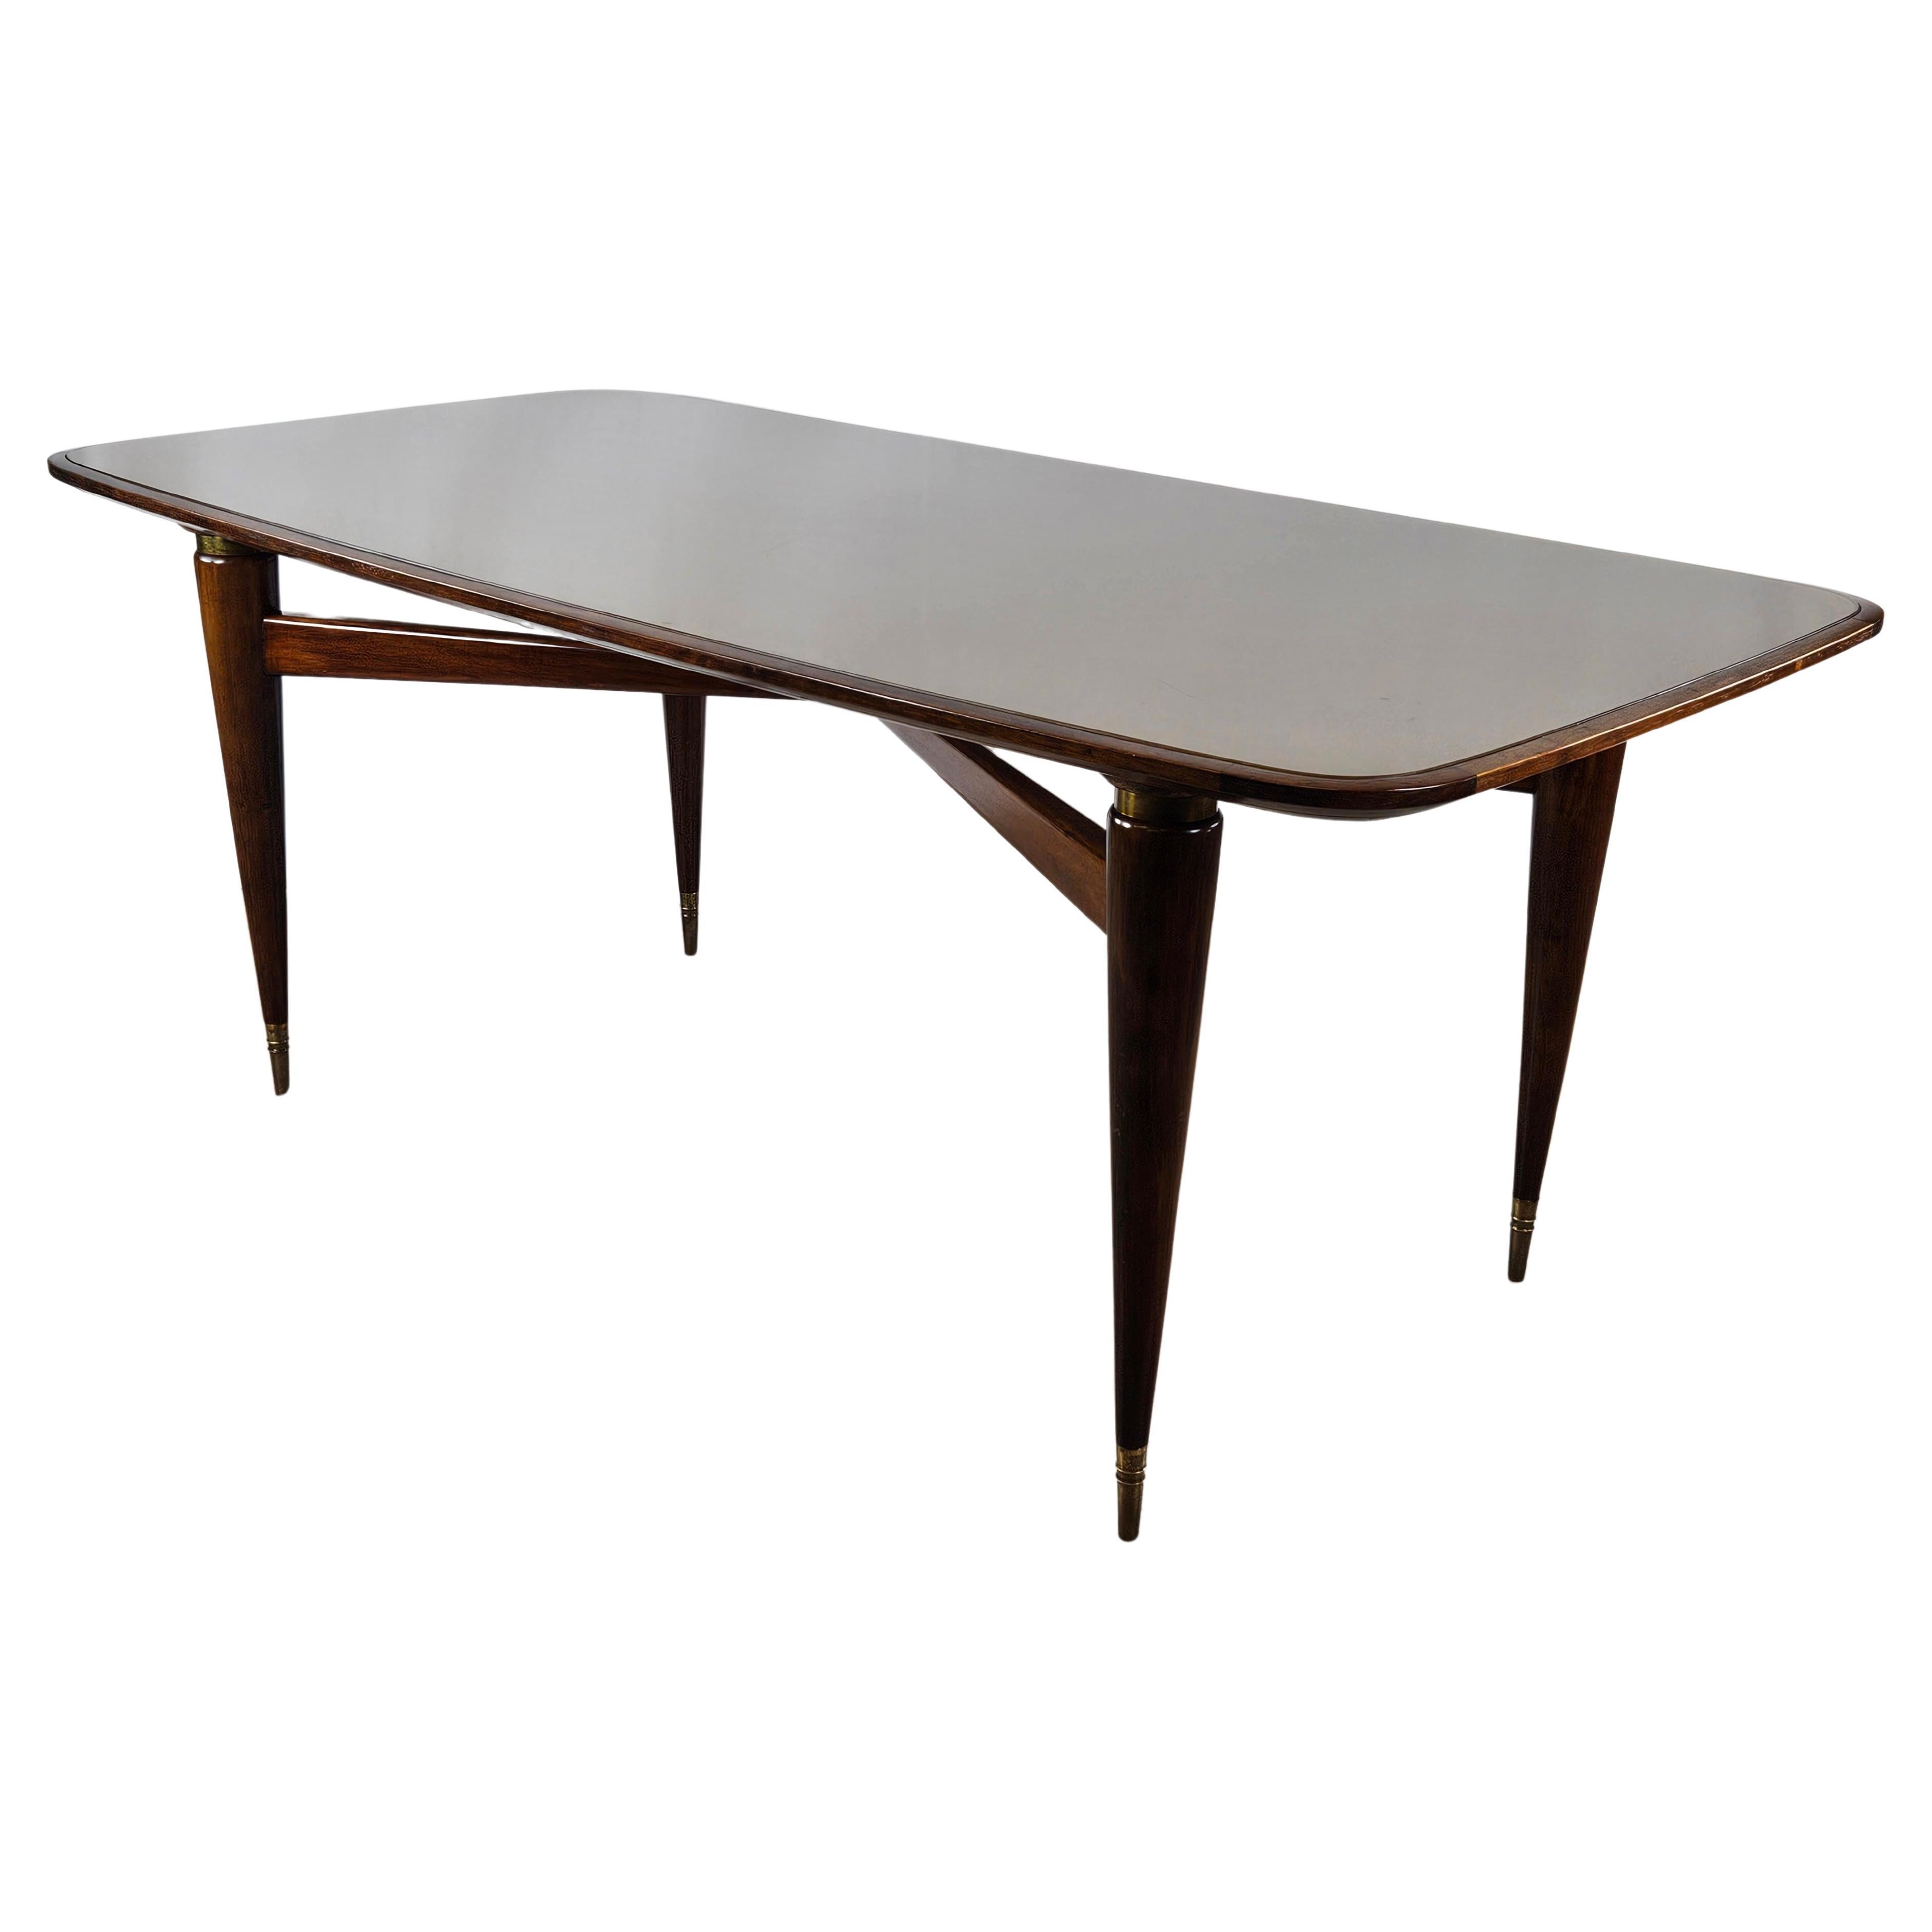 Rectangular walnut dining table with glass top and brass decorations